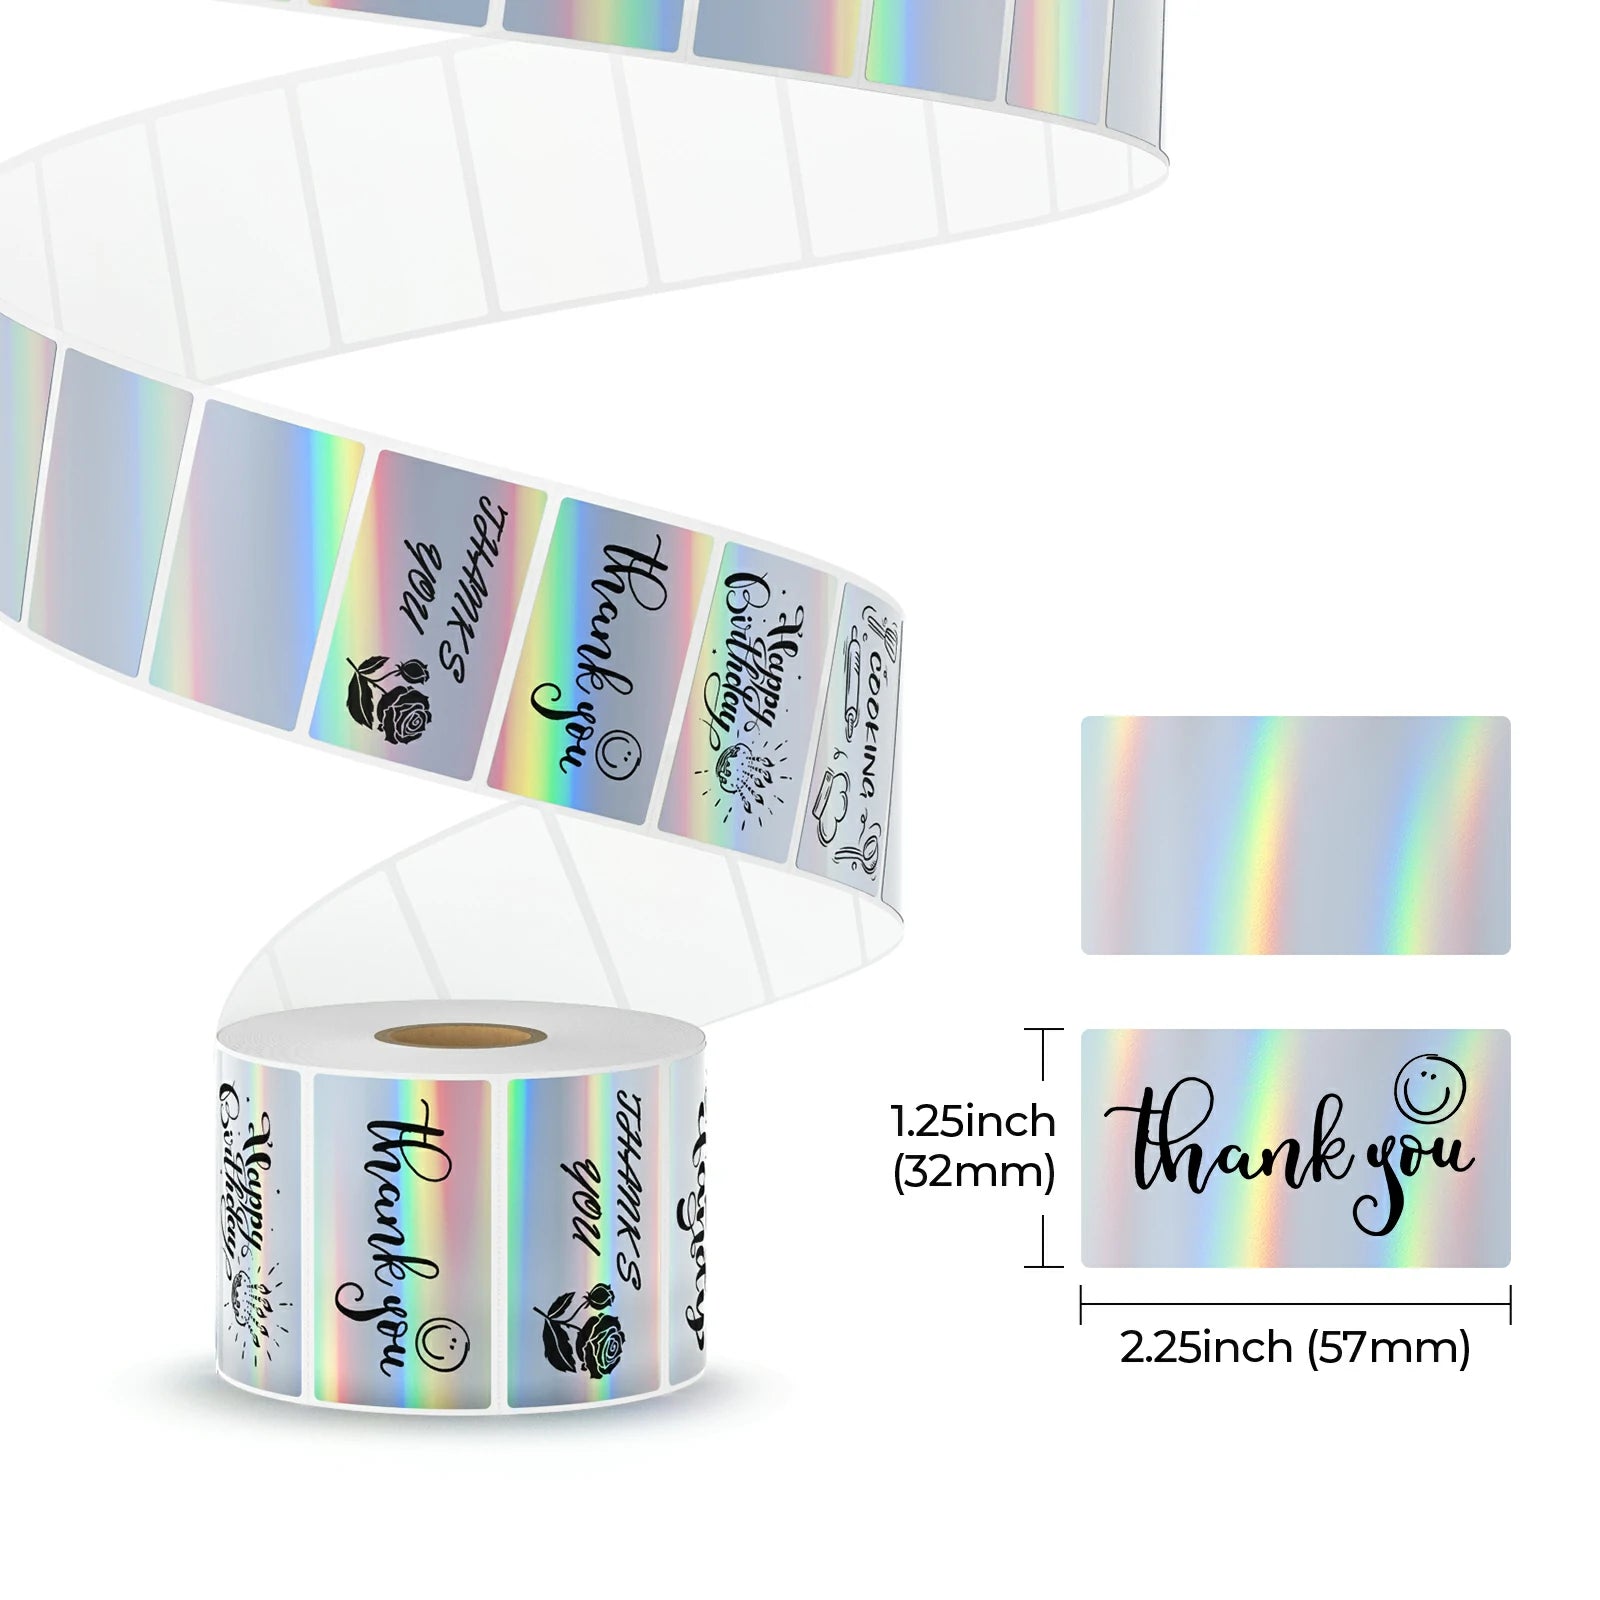 MUNBYN  hologram rectangle thermal labels are 57mm x 32mm.